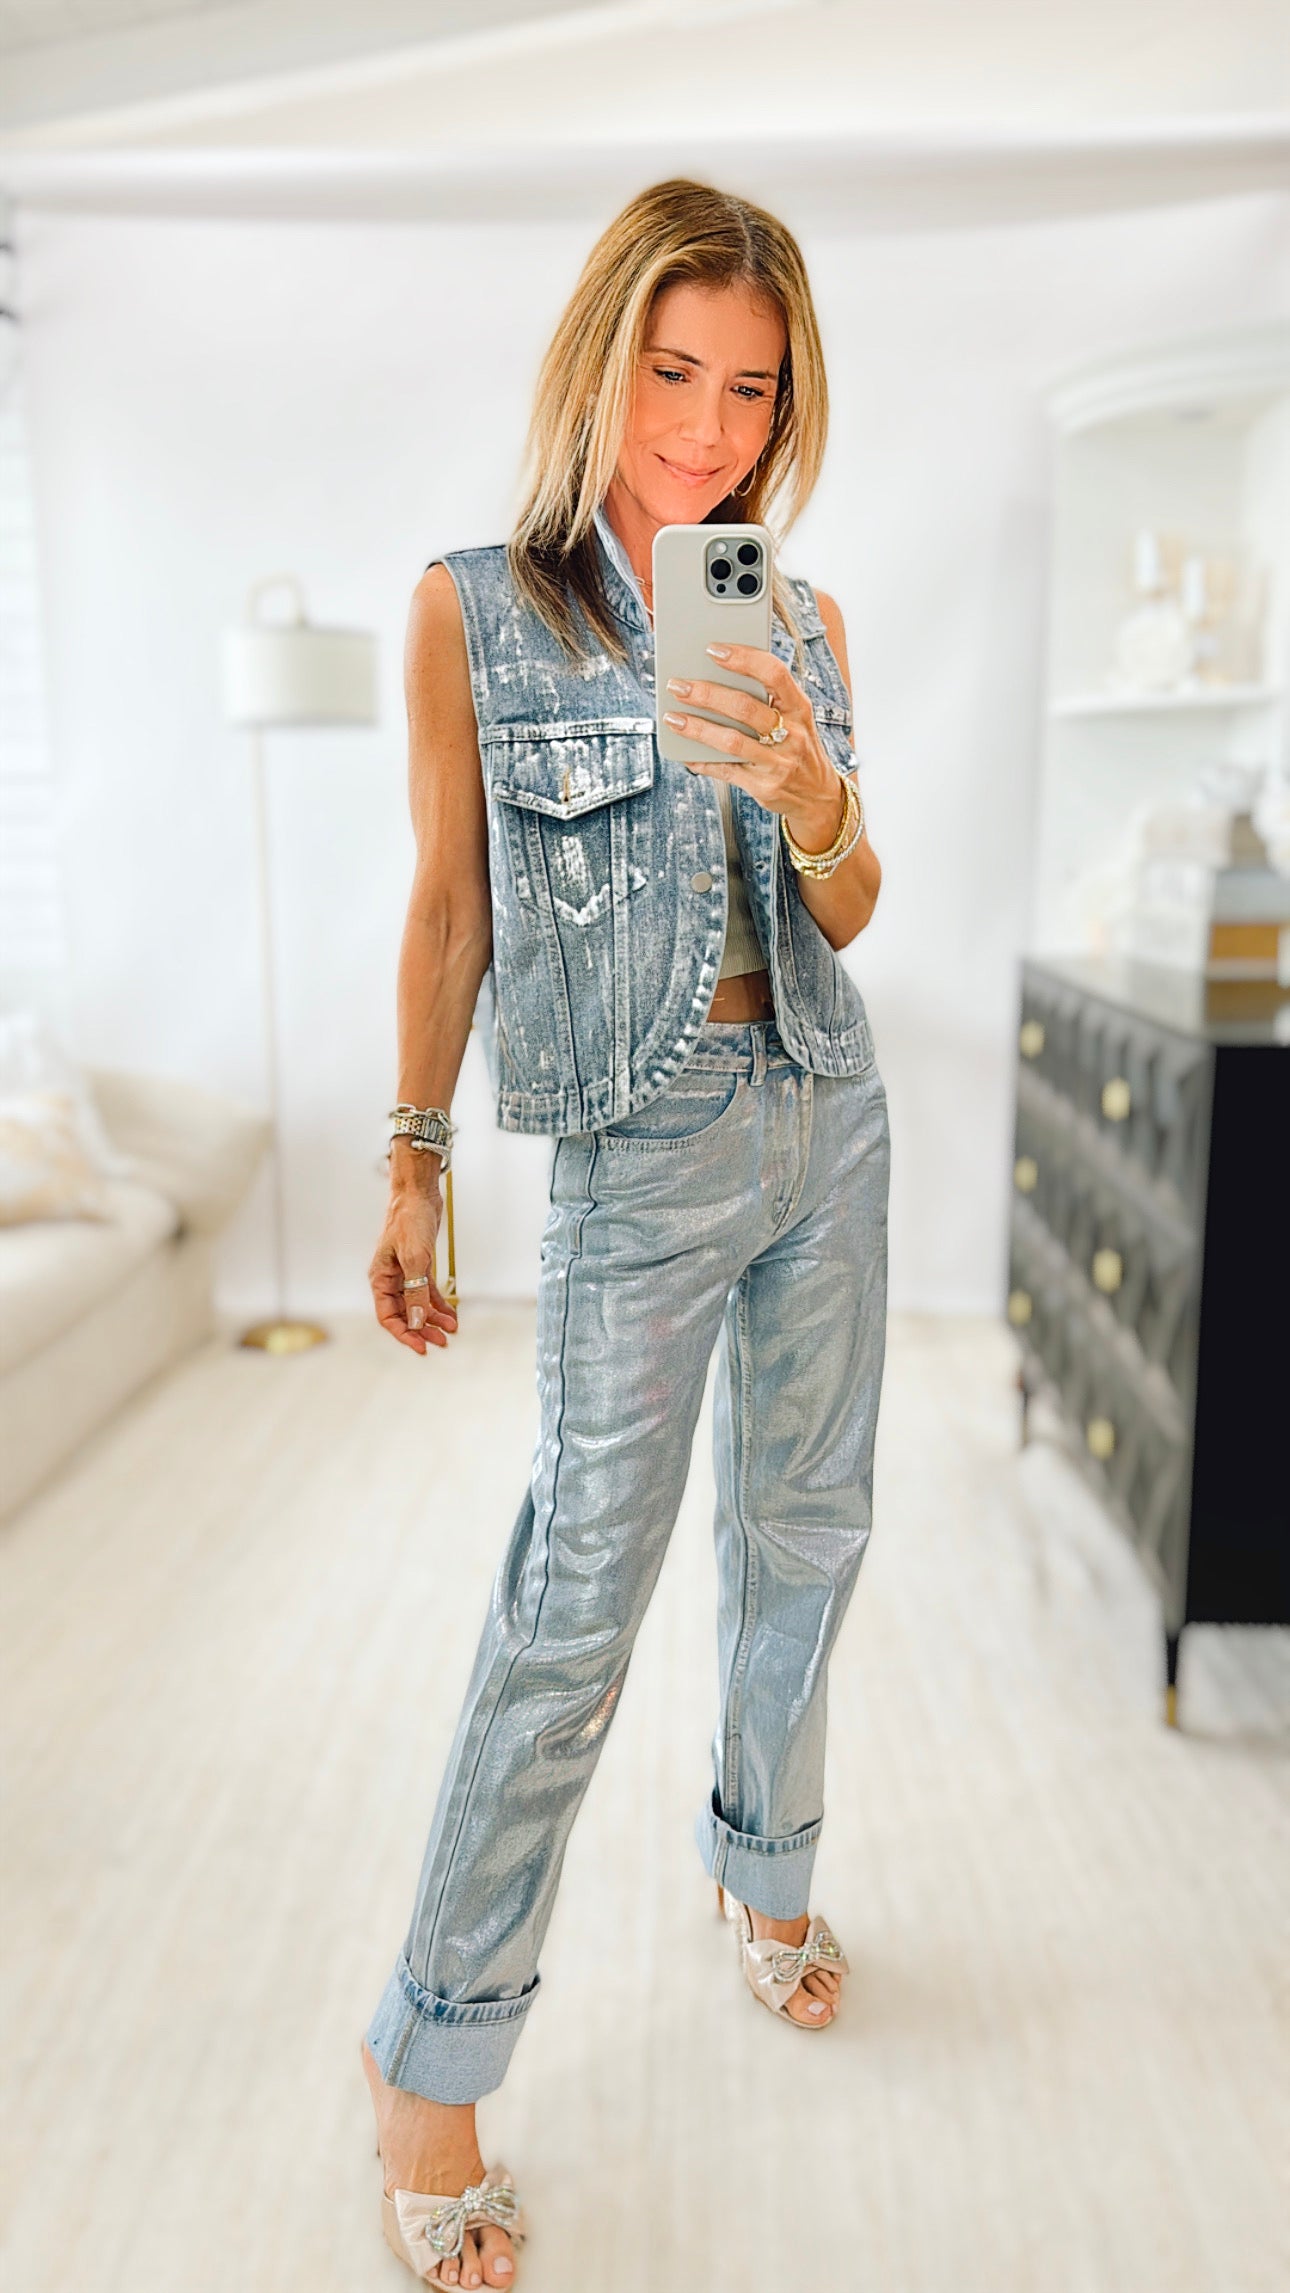 Stop the Show Metallic Denim Vest - Silver-160 Jackets-pastel design-Coastal Bloom Boutique, find the trendiest versions of the popular styles and looks Located in Indialantic, FL